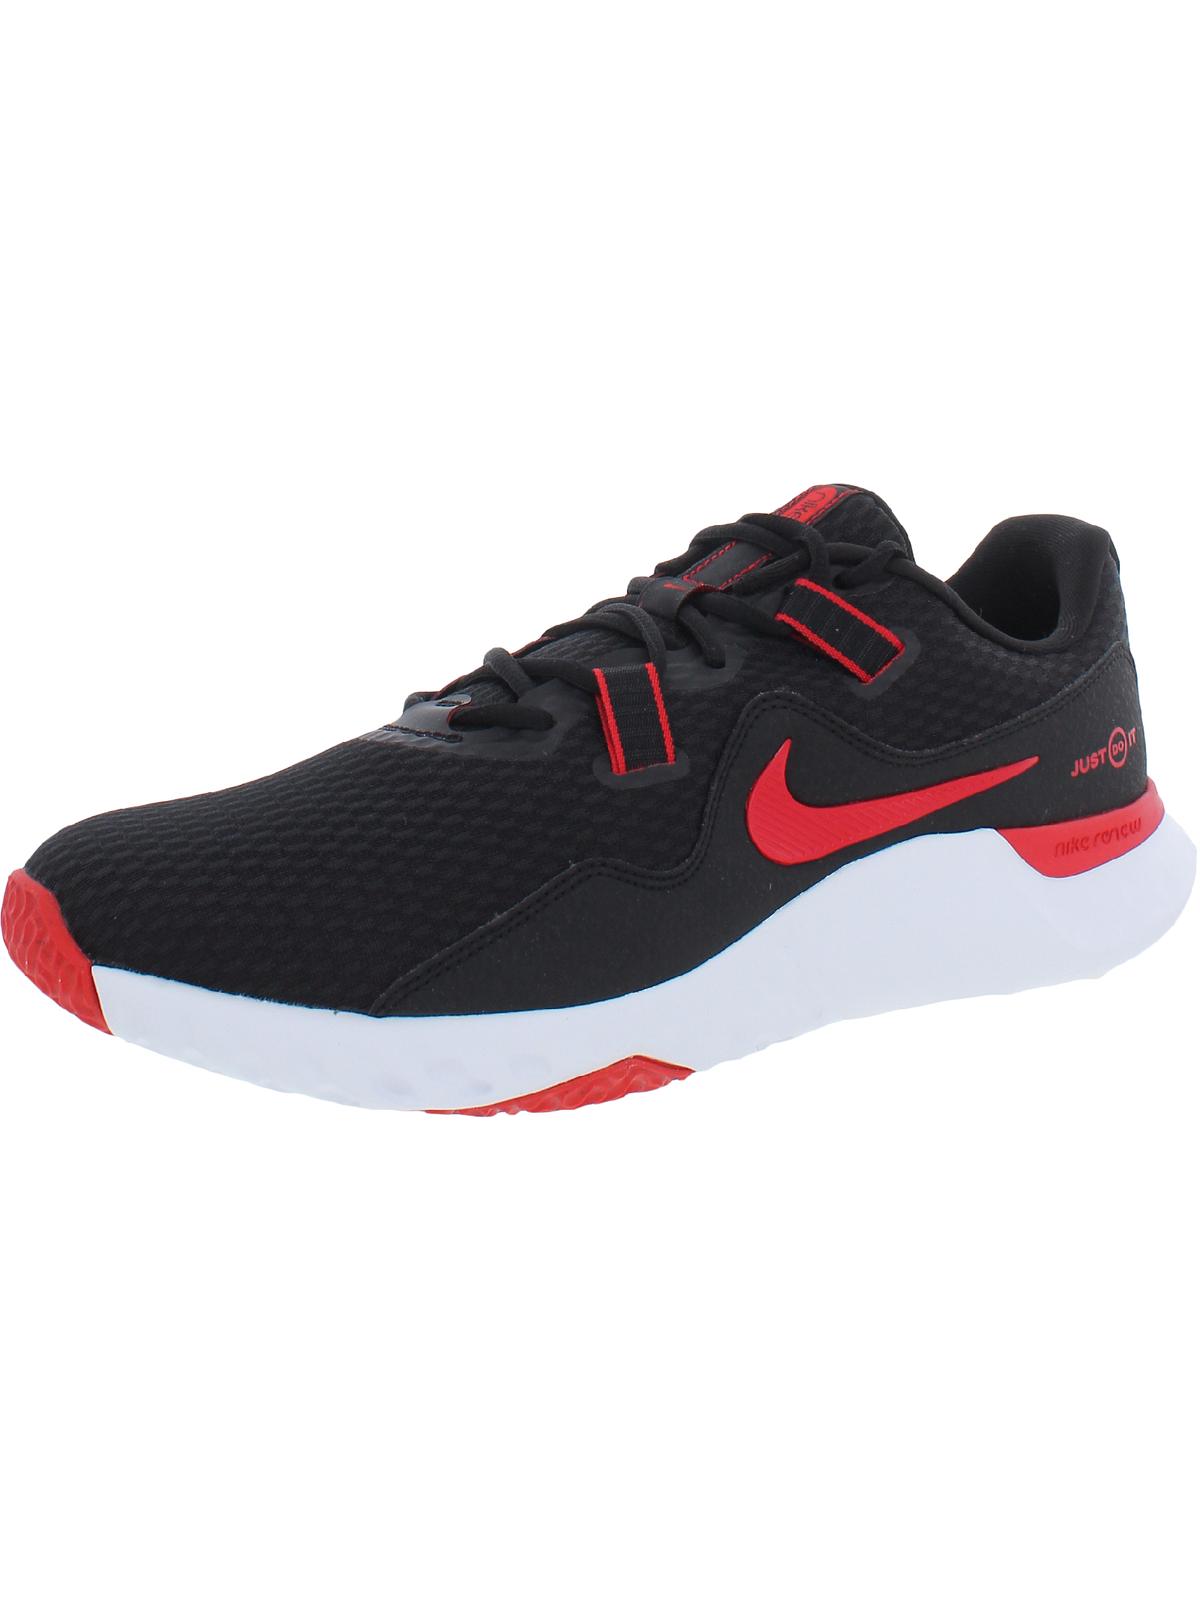 NIKE Renew Retaliation Tr 2 Mens Faux Leather Performance Athletic and Training Shoes